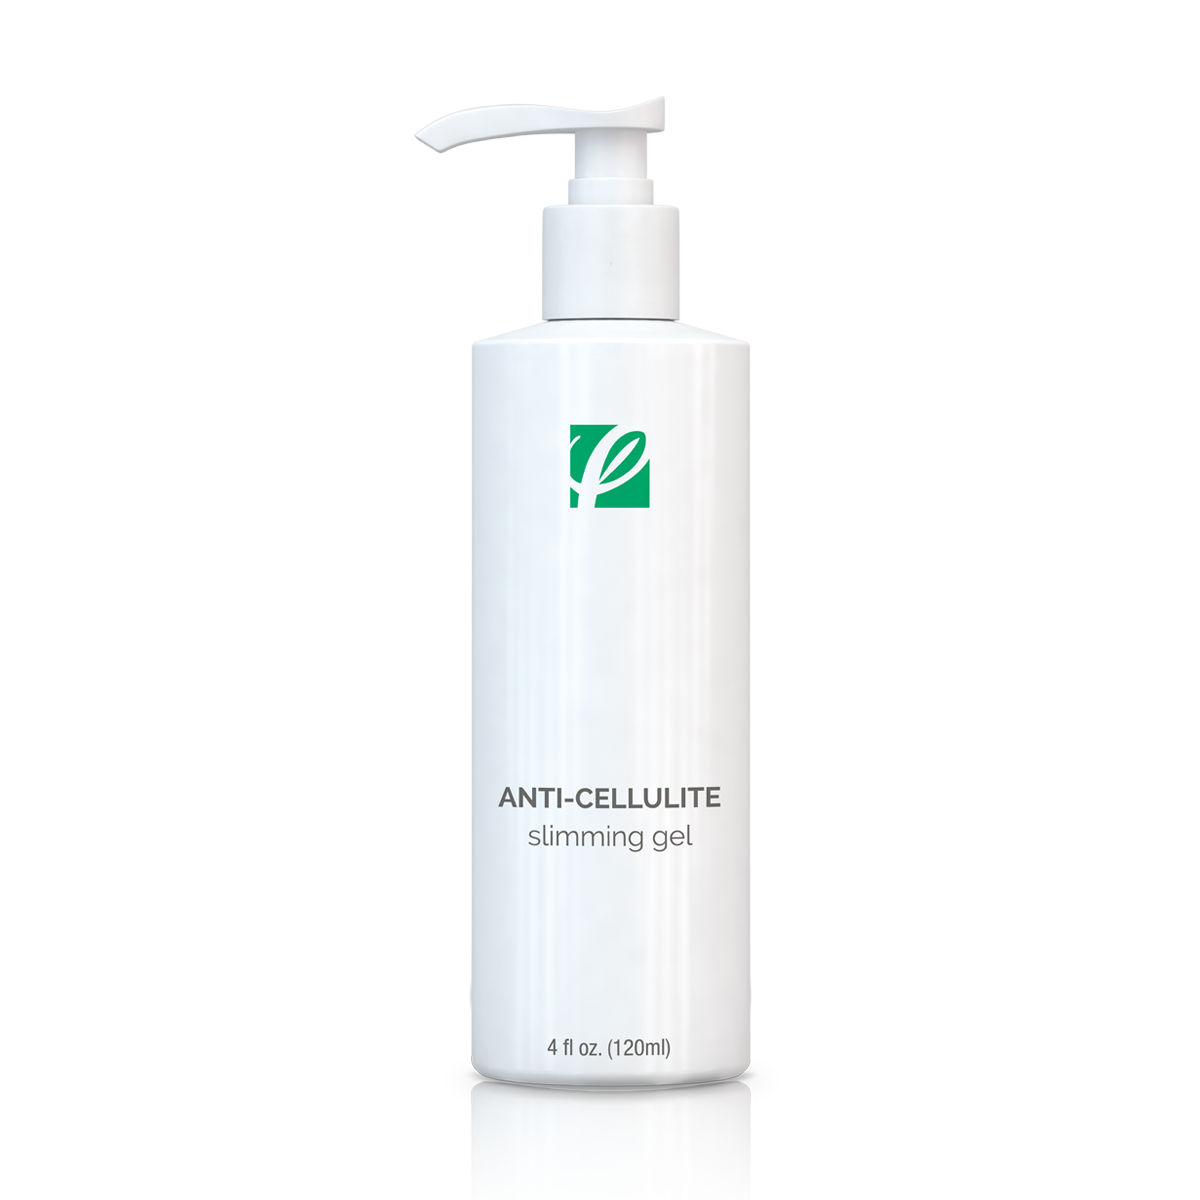 Muscle Relief Gel. Ion styling solutions косметика. Mesoestetic косметика logo PNG. Anti Blemish body Lotion. 120 gel